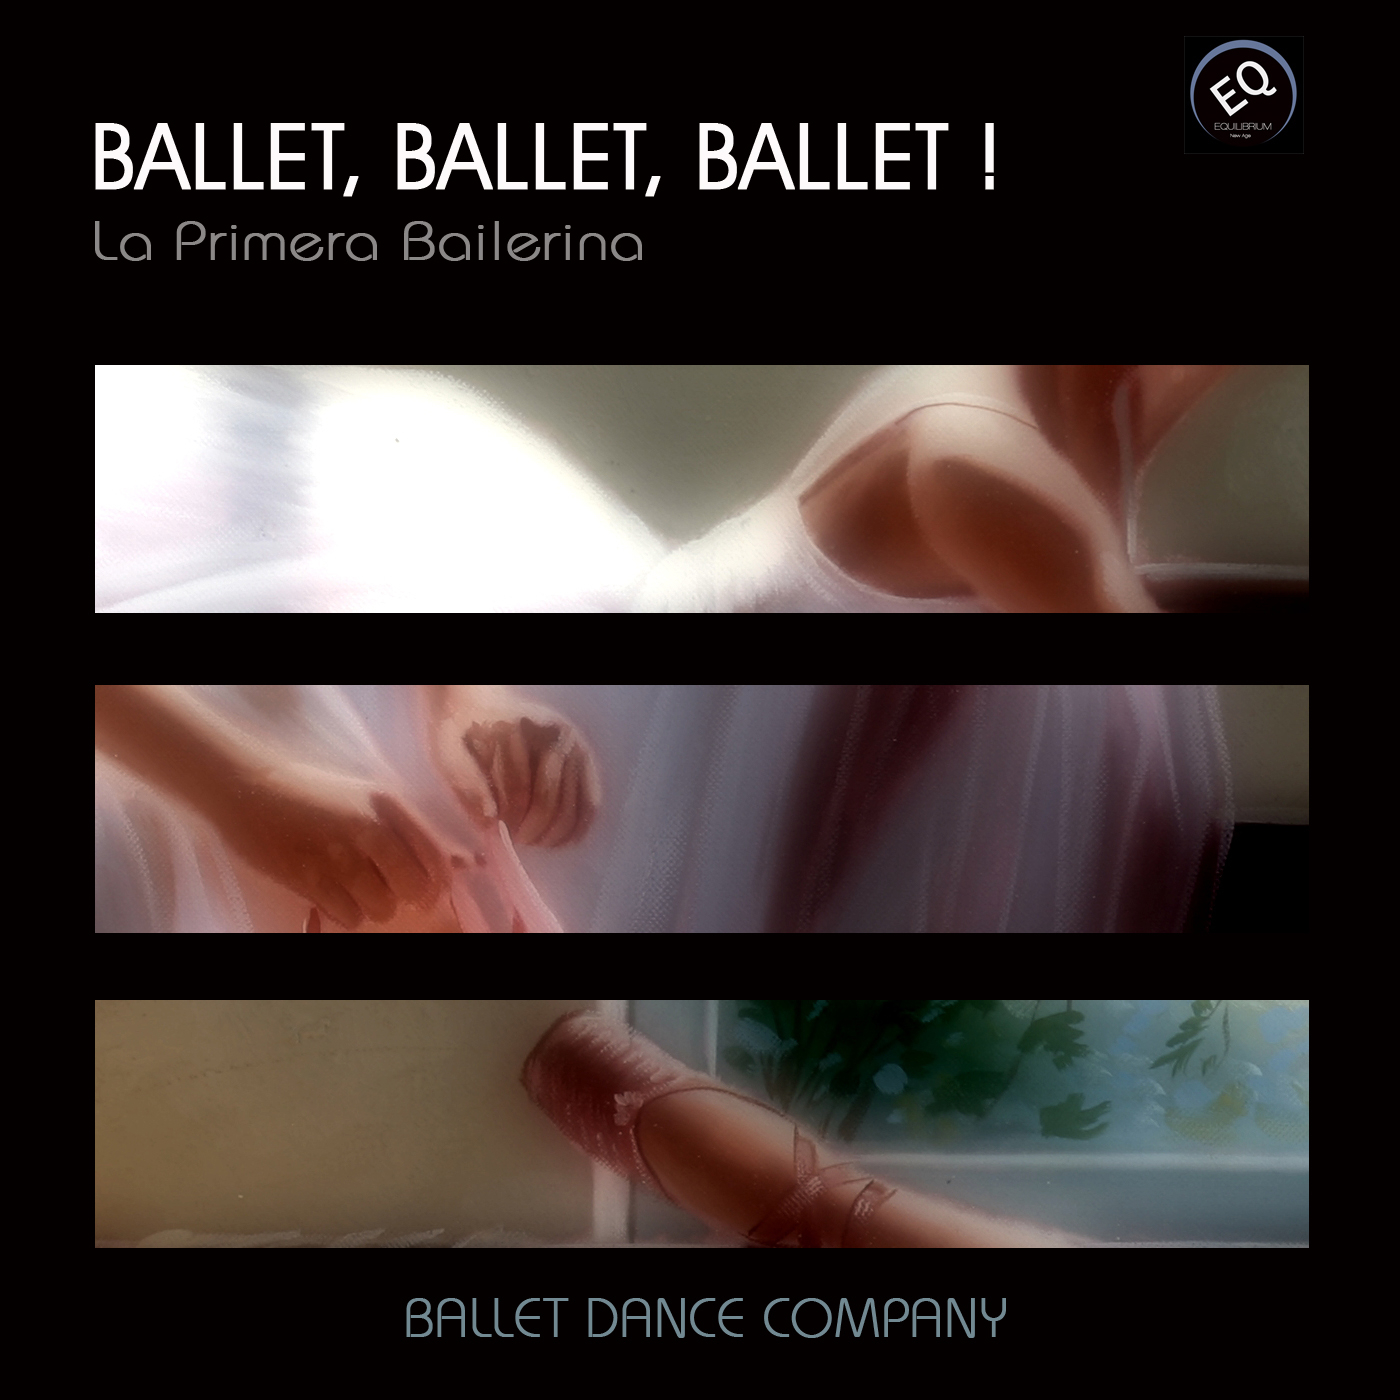 Brises - Ballet Class Music - Musical Preparation Given for This Track